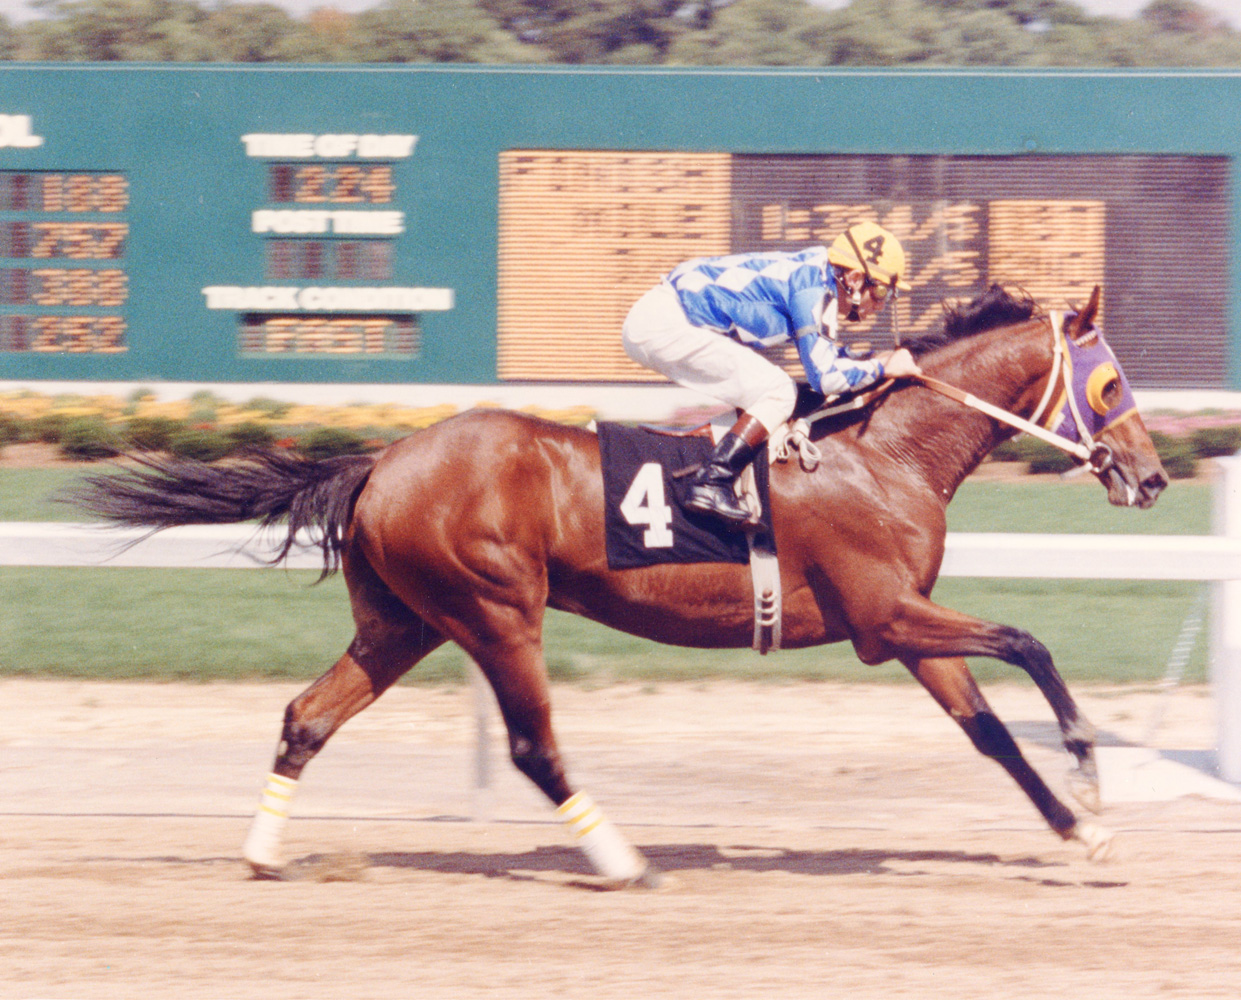 Don Brumfield and Alysheba winning a Maiden Special Weight event at Turfway Park in September 1986 (Lang Photos/Museum Collection)